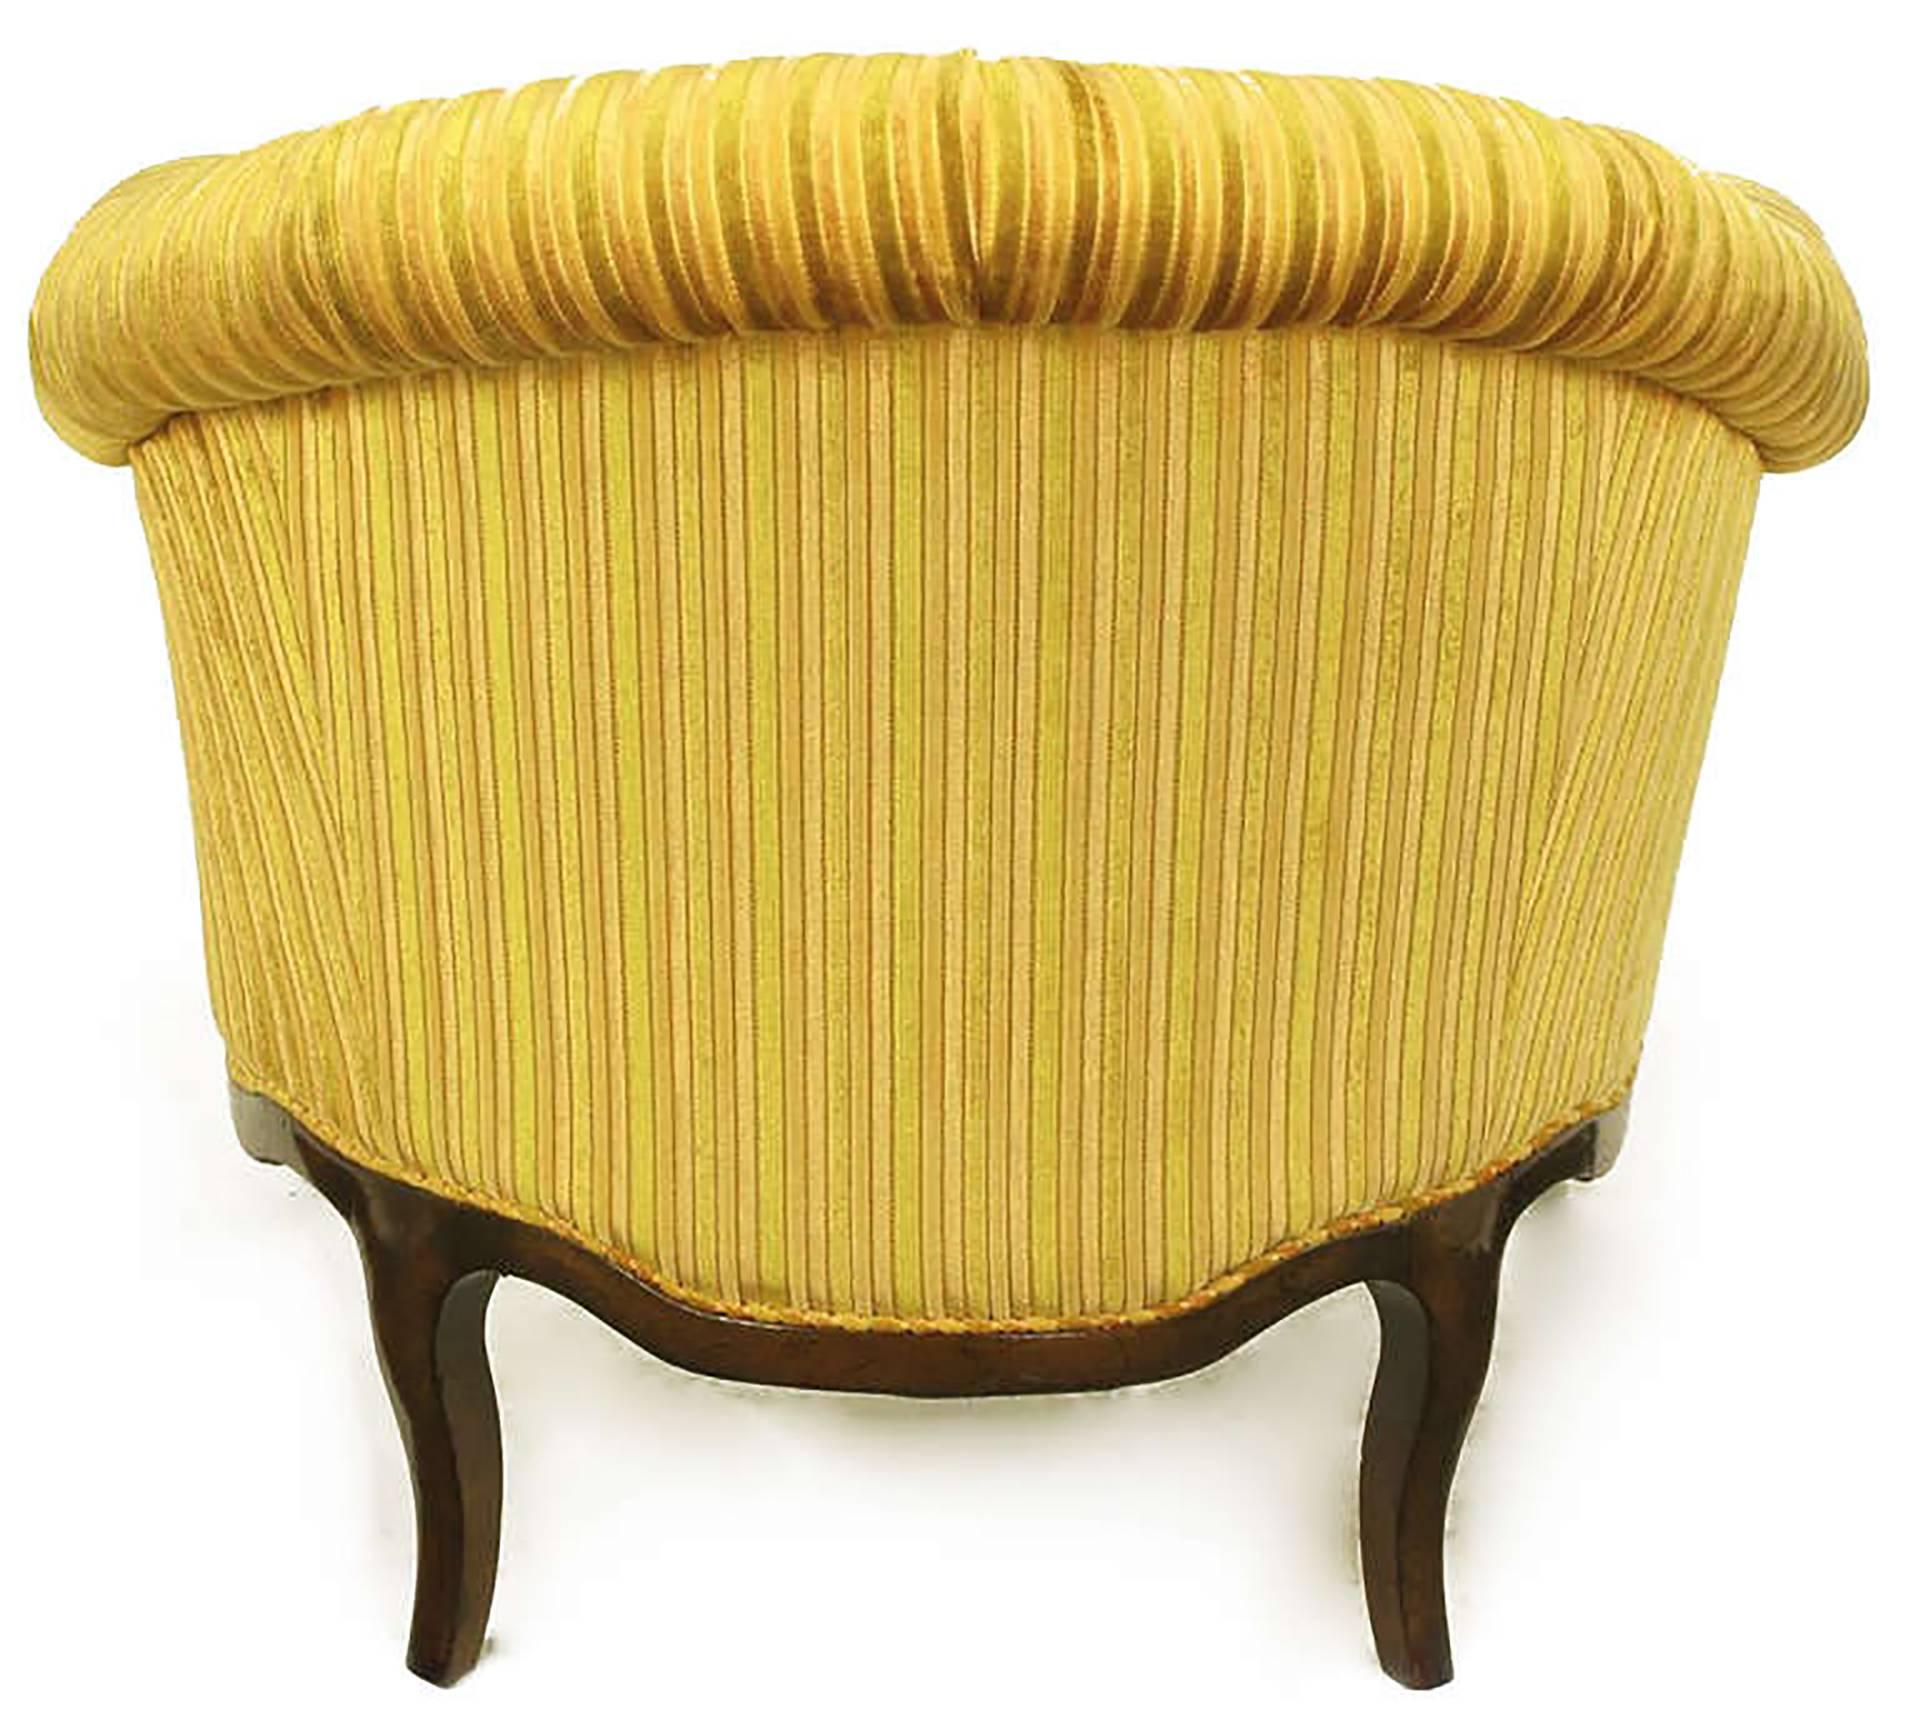 Mid-20th Century Elegant Pair of Interior Crafts Button-Tufted Barrel-Back Lounge Chairs